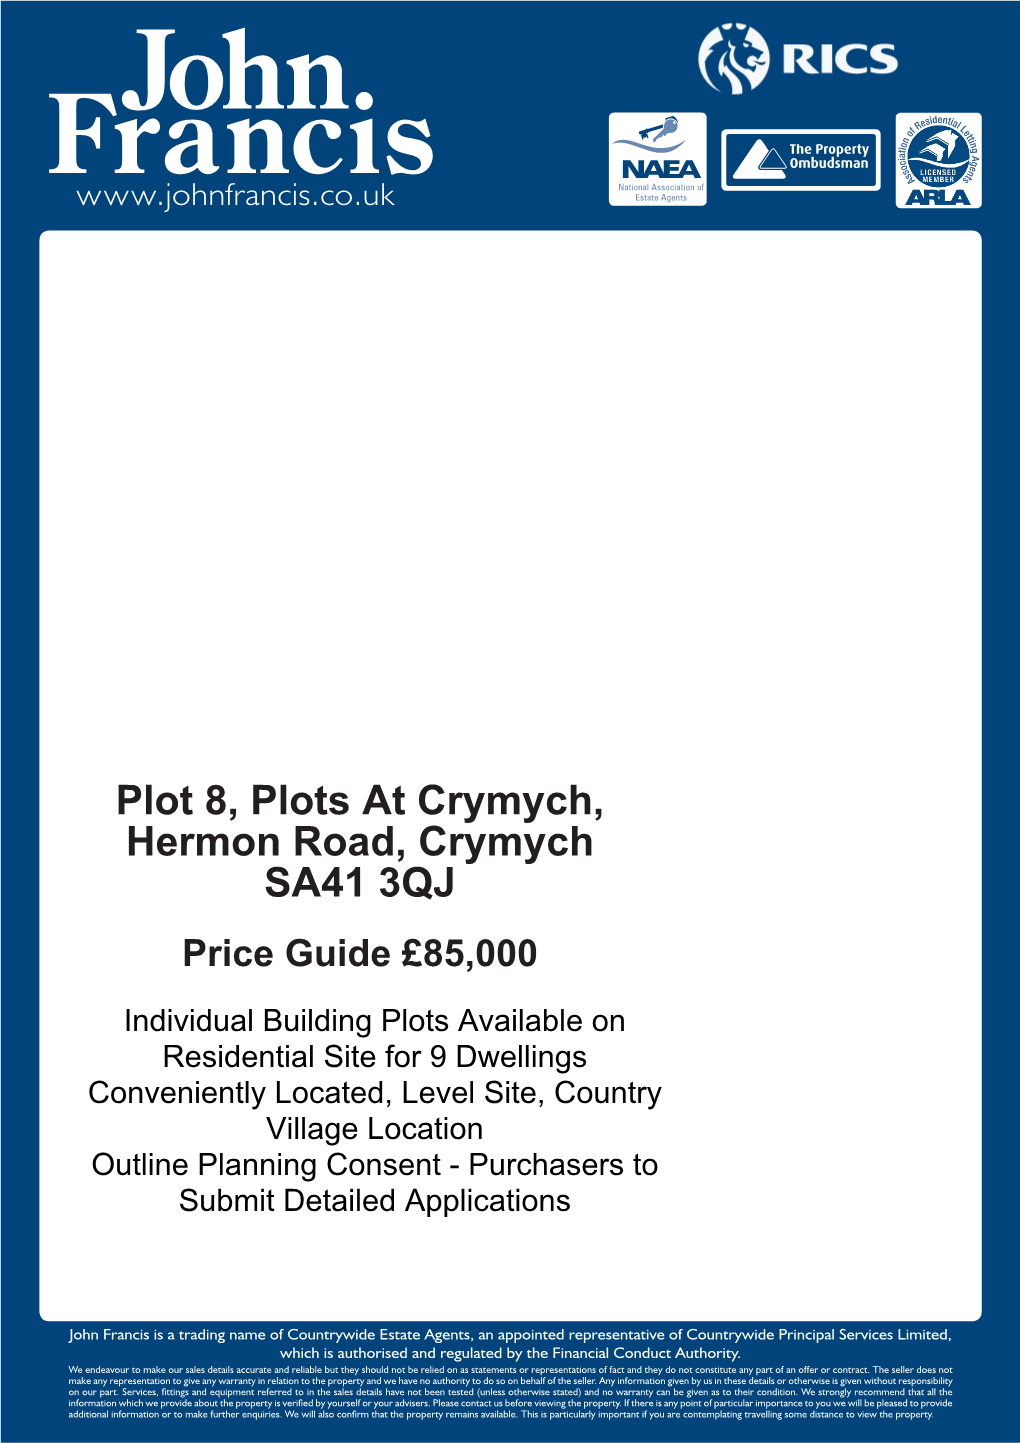 Plot 8, Plots at Crymych, Hermon Road, Crymych SA41 3QJ Price Guide £85,000